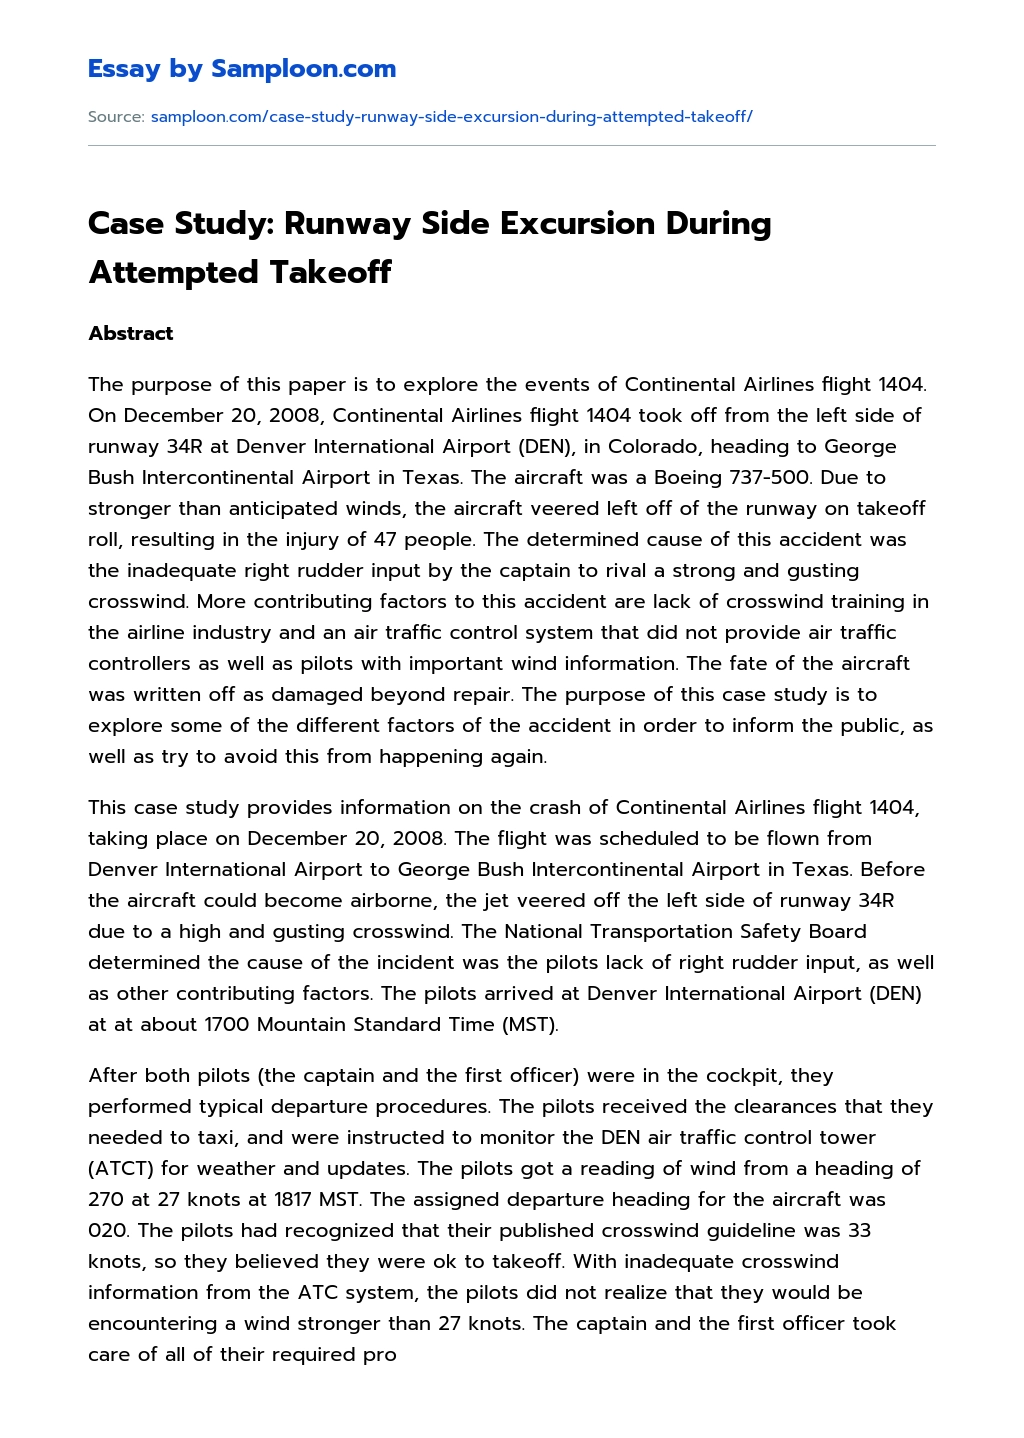 Case Study: Runway Side Excursion During Attempted Takeoff essay